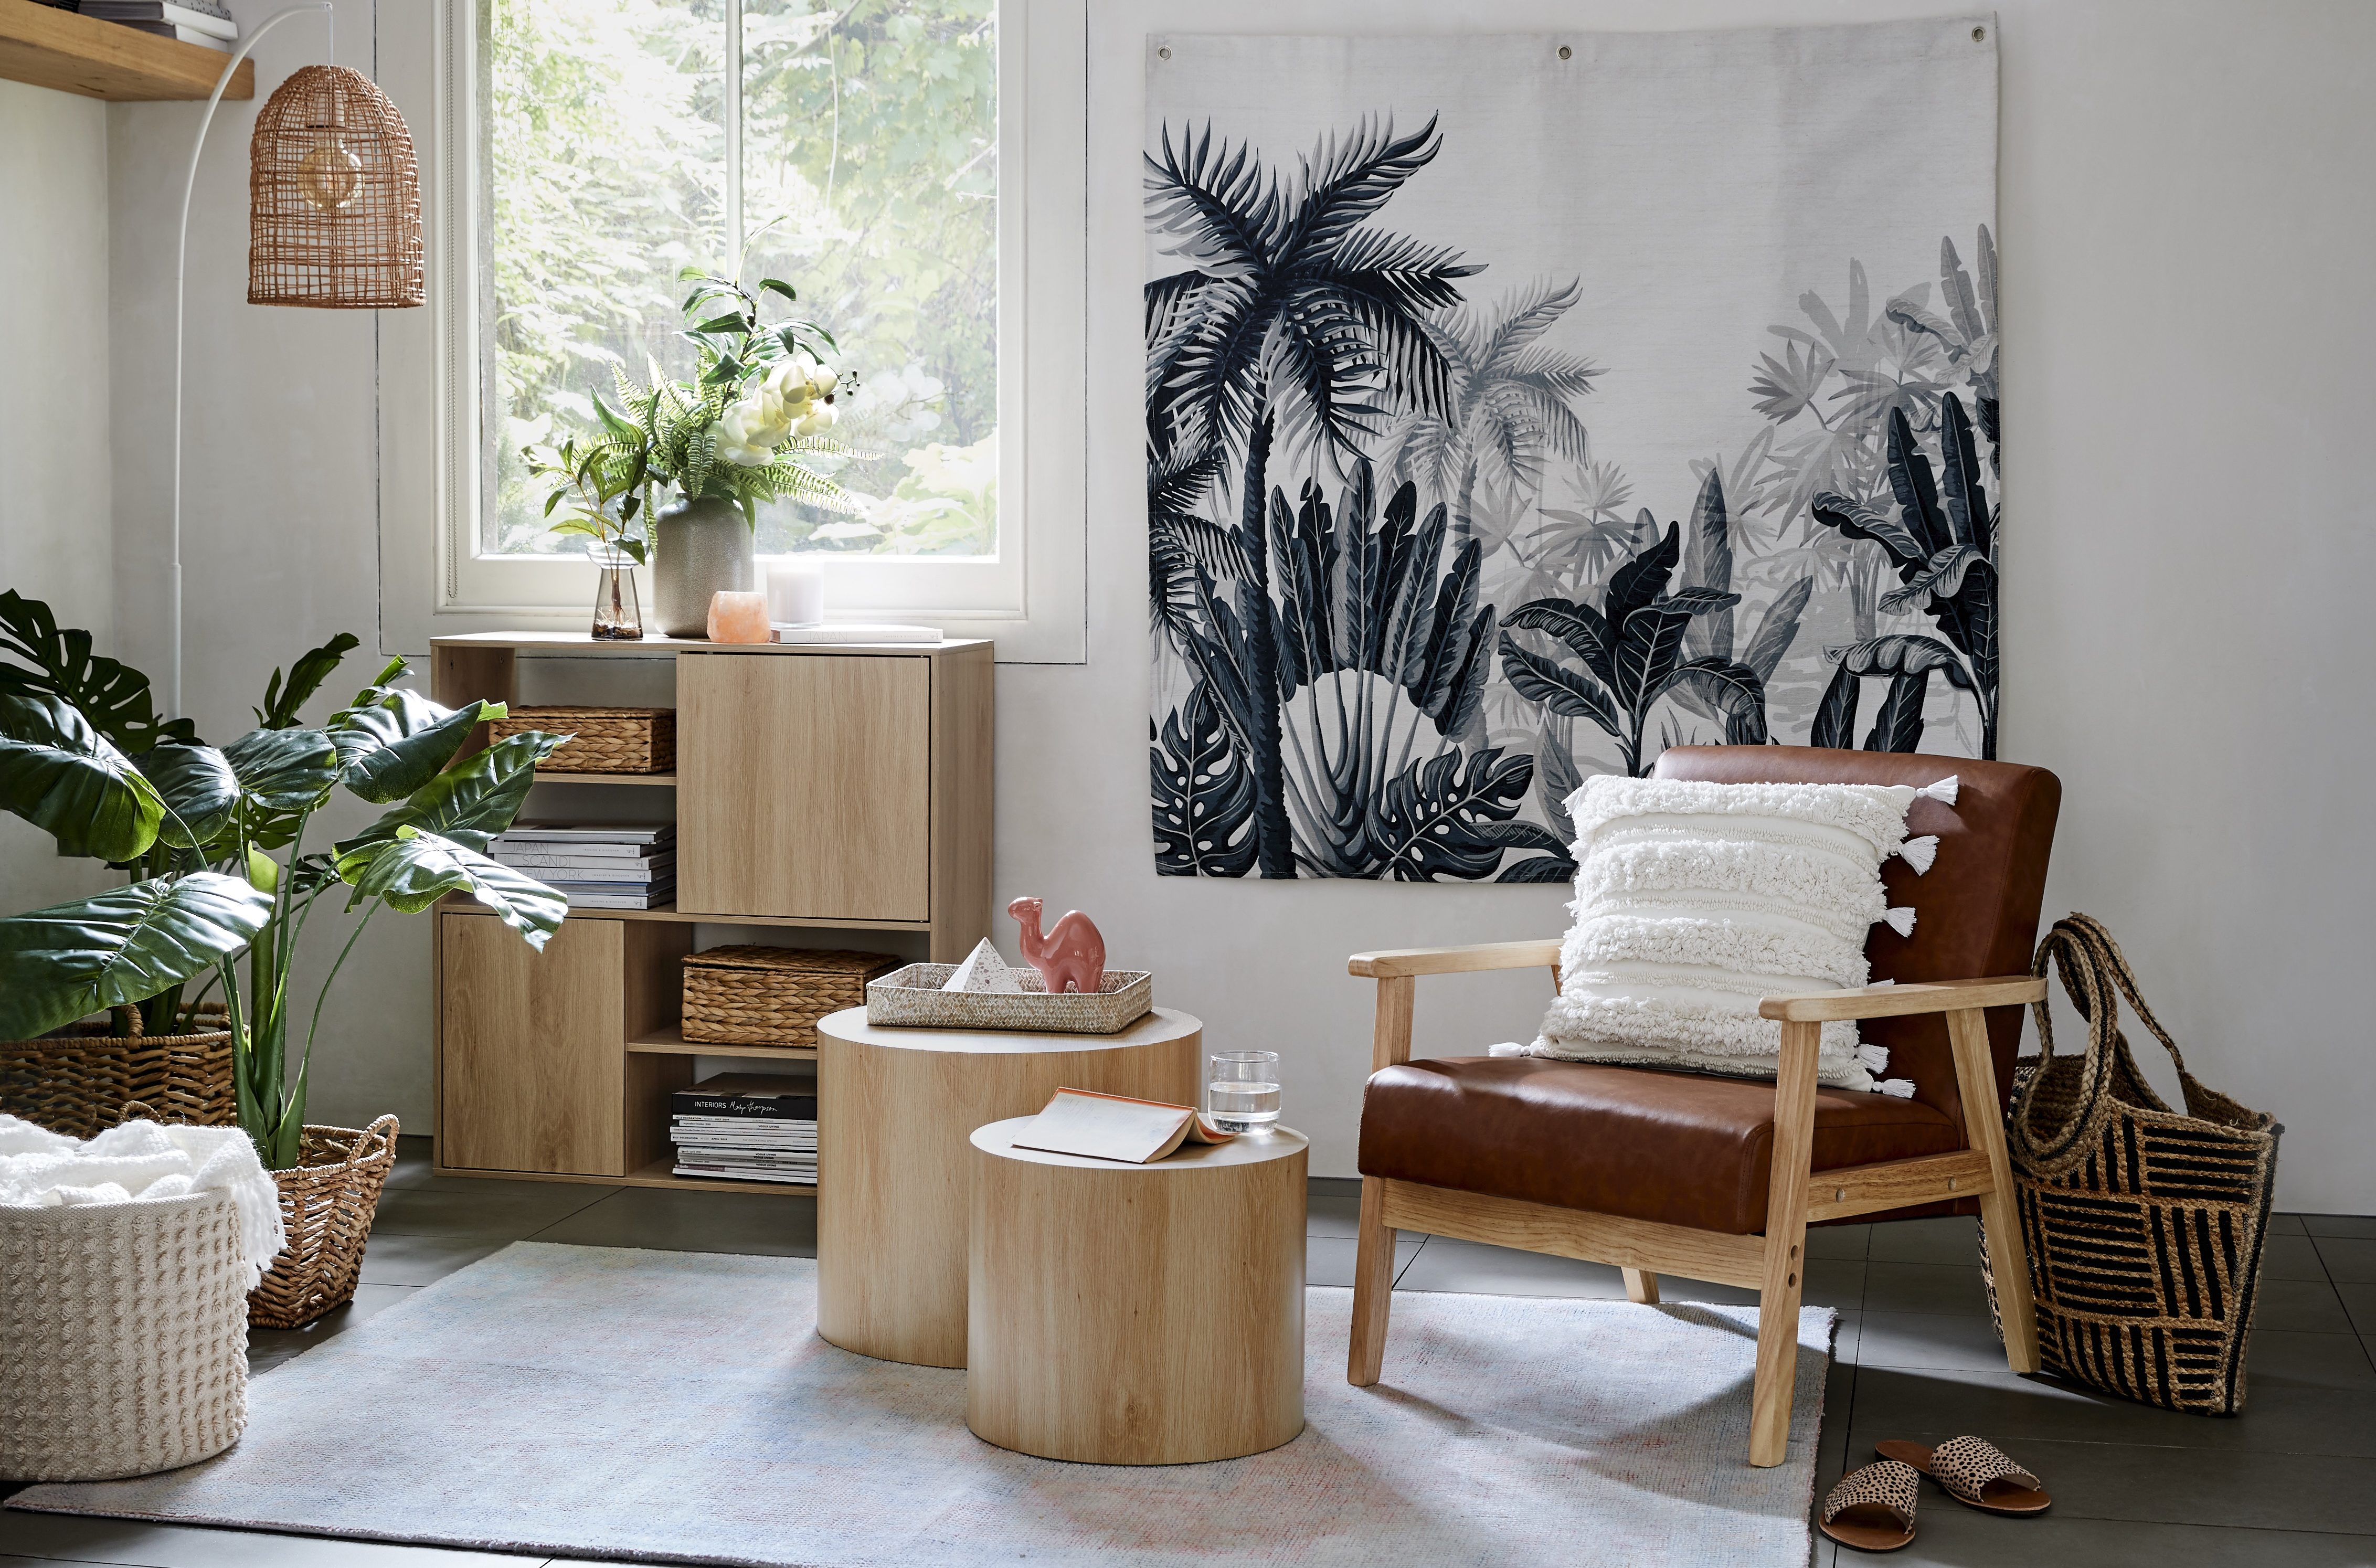 Purge Those Ratty Old Couches, Kmart Has Unleashed Its New Living Range For 2020